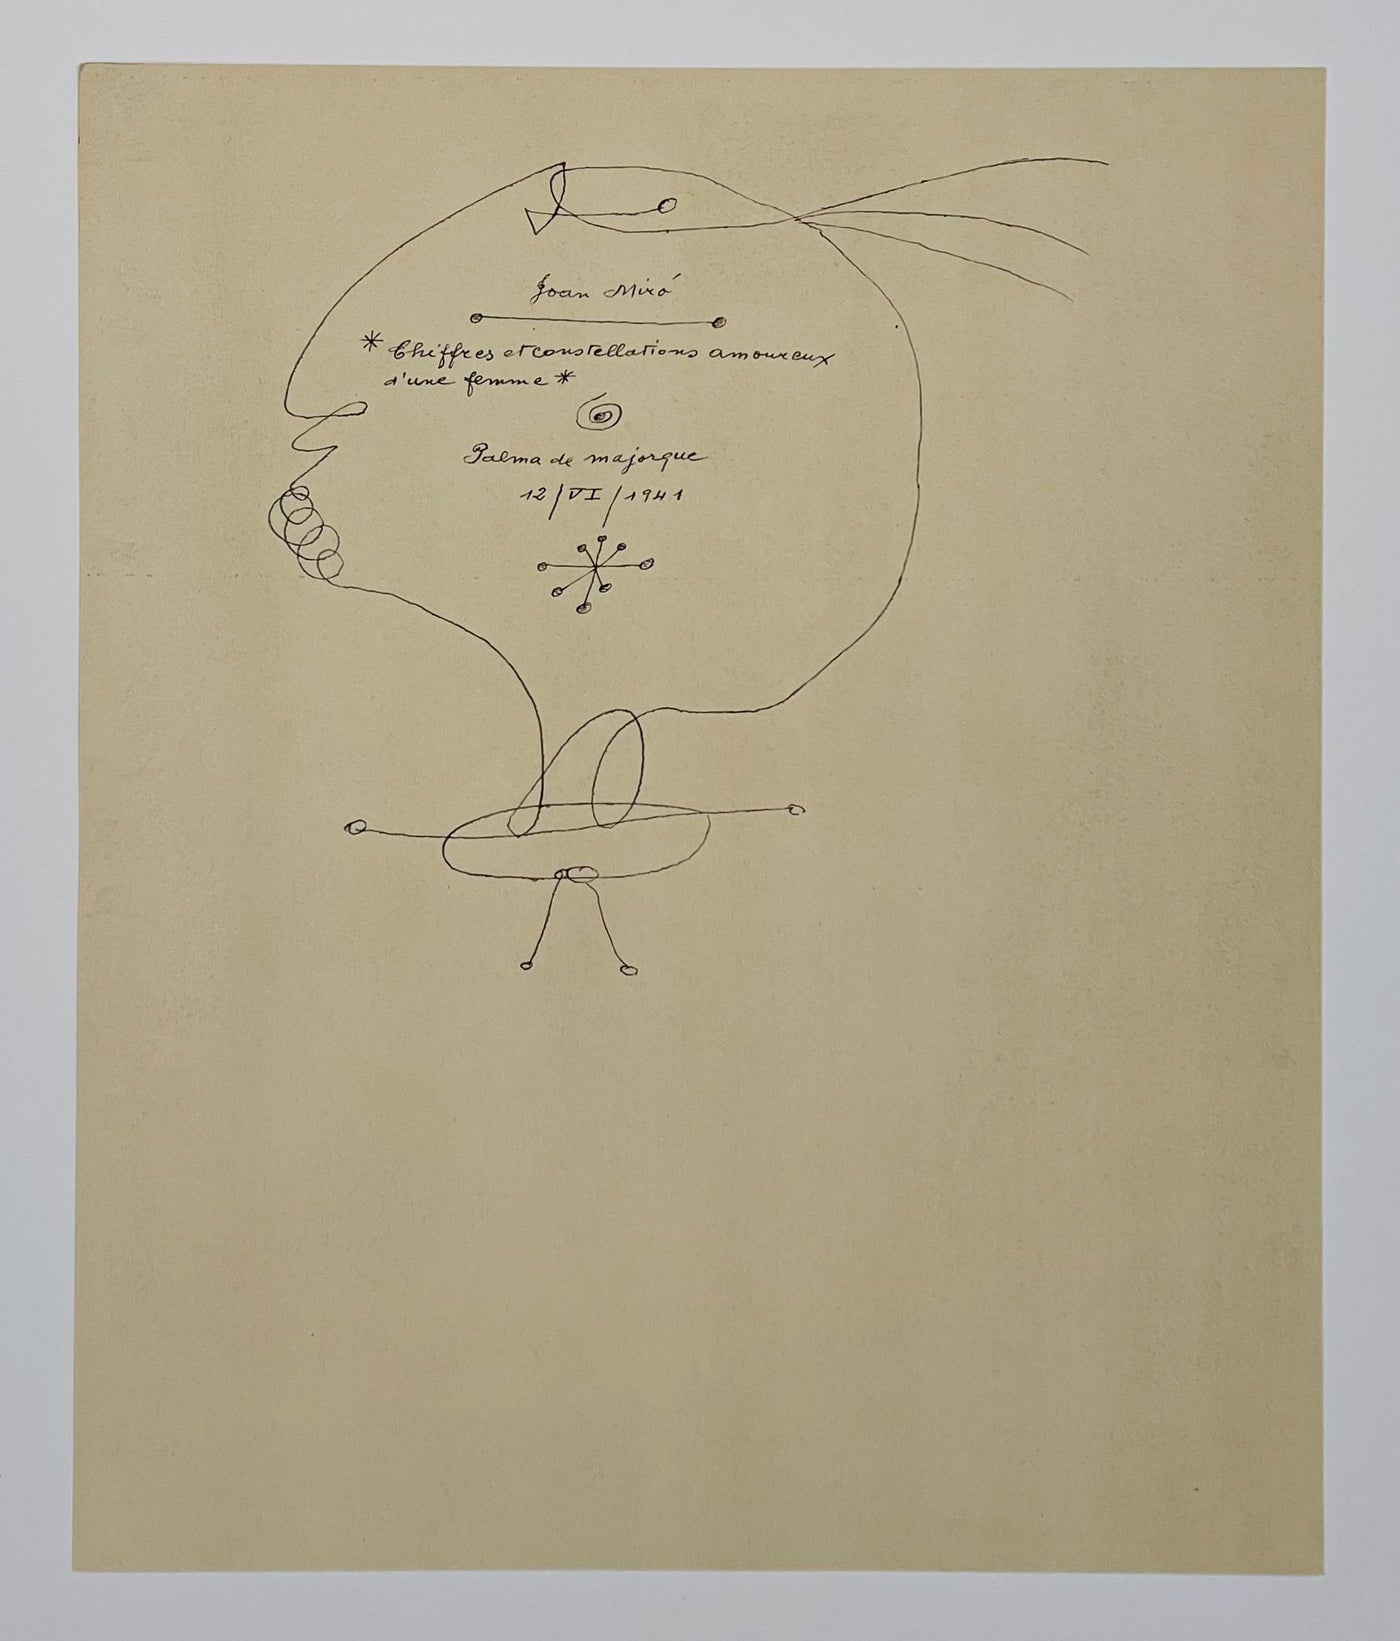 Joan Miro (after) Chiffres et constellations amoureux d'une femme (Ciphers and Constellations in Love with a Woman), Plate XIX (Cramer No. 58) 1959